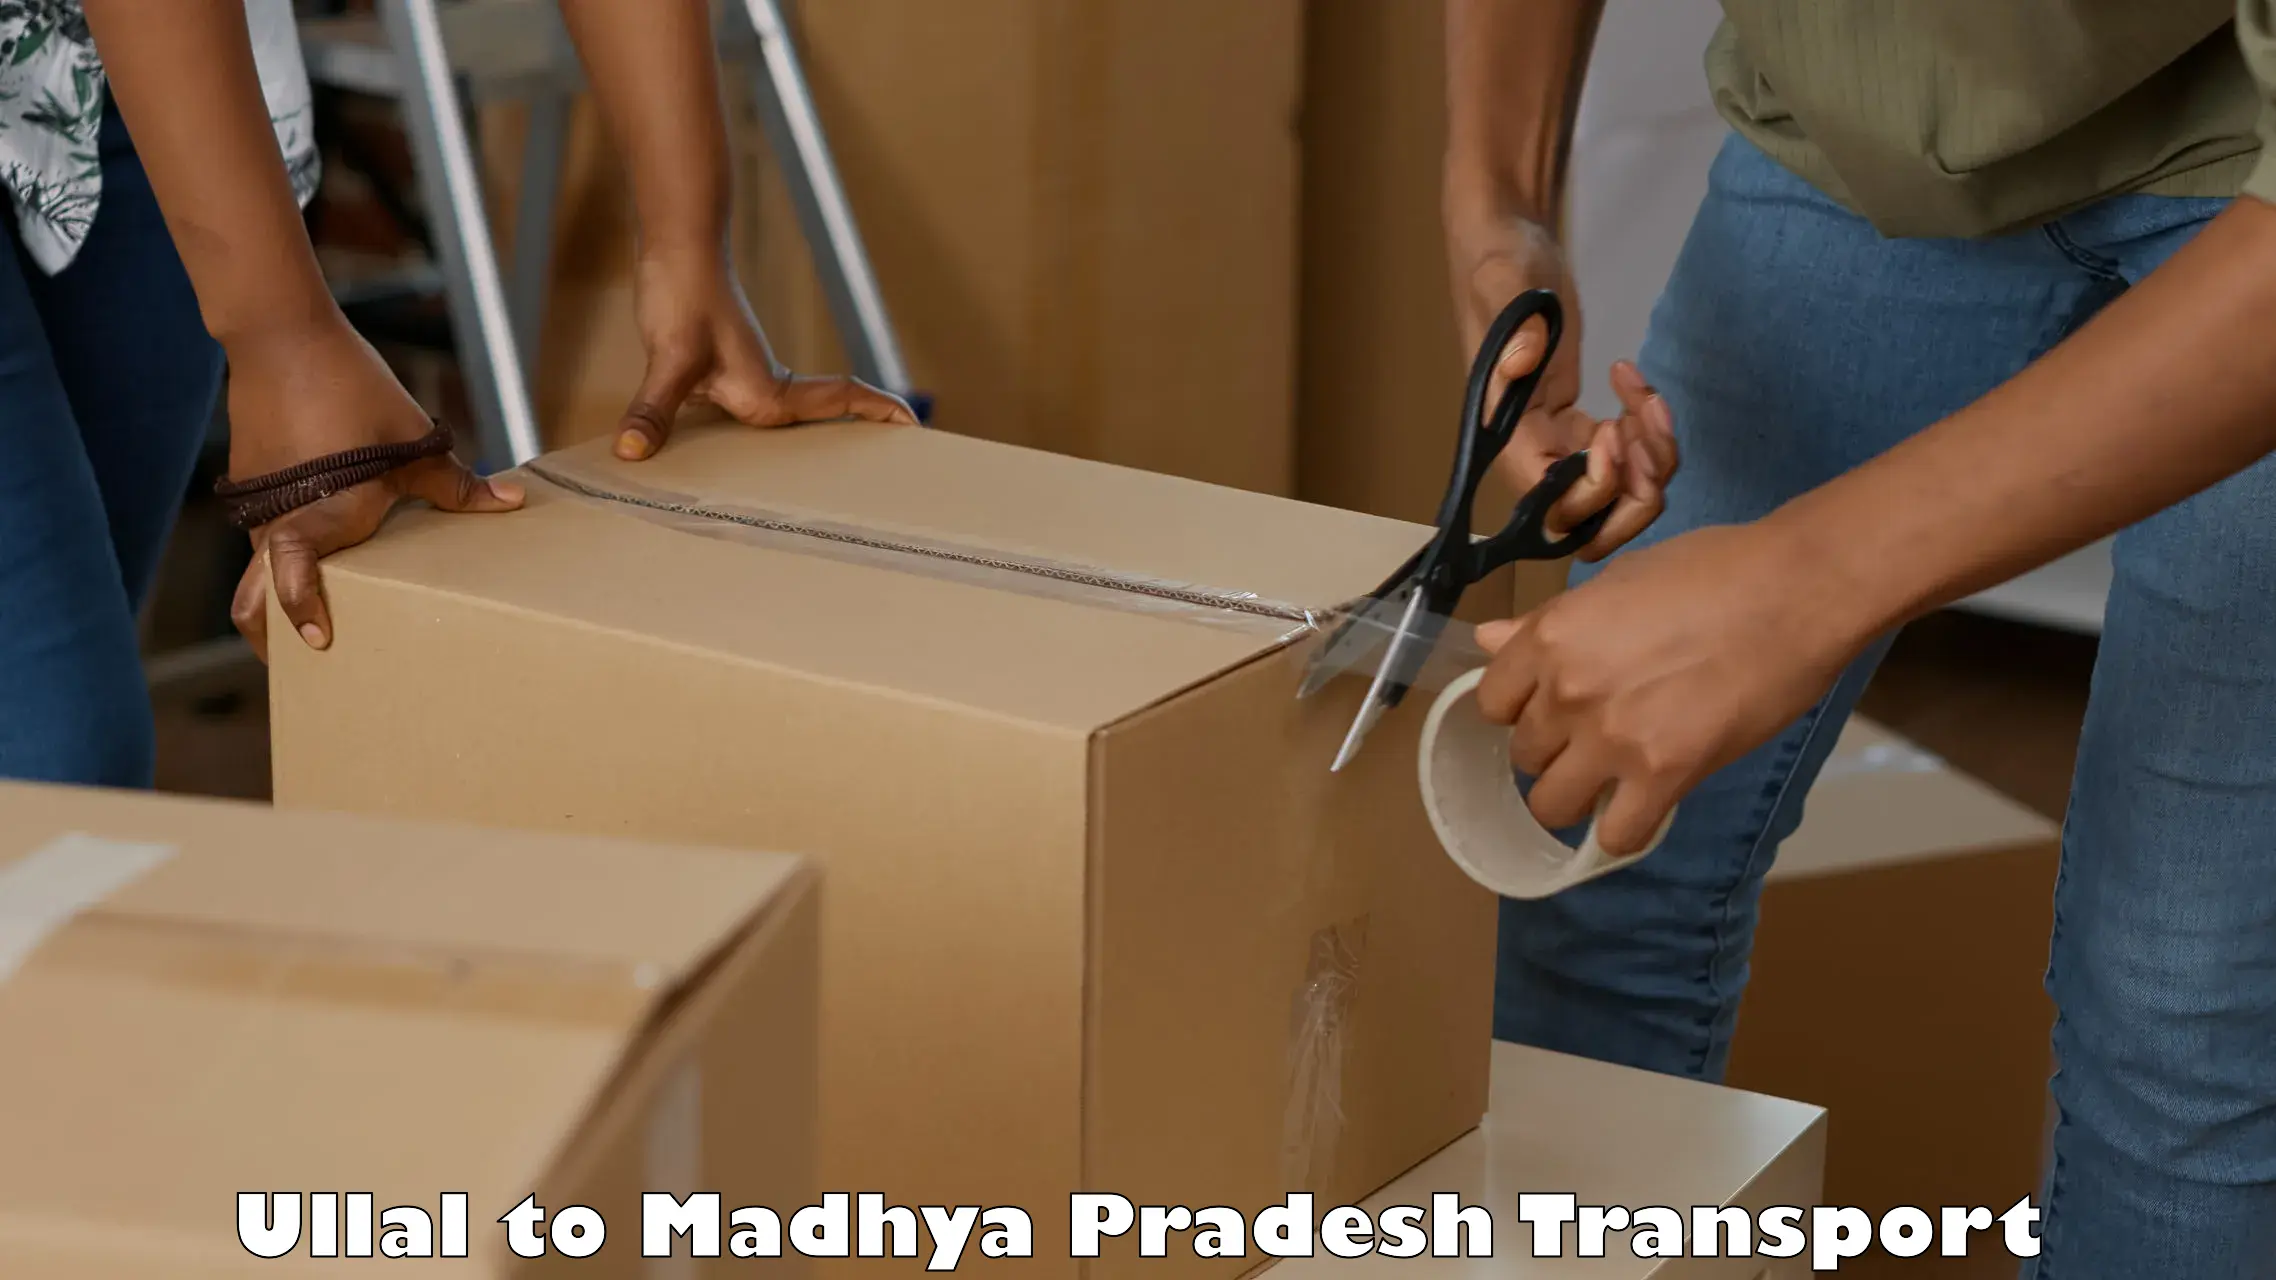 Truck transport companies in India Ullal to Jawad Neemuch